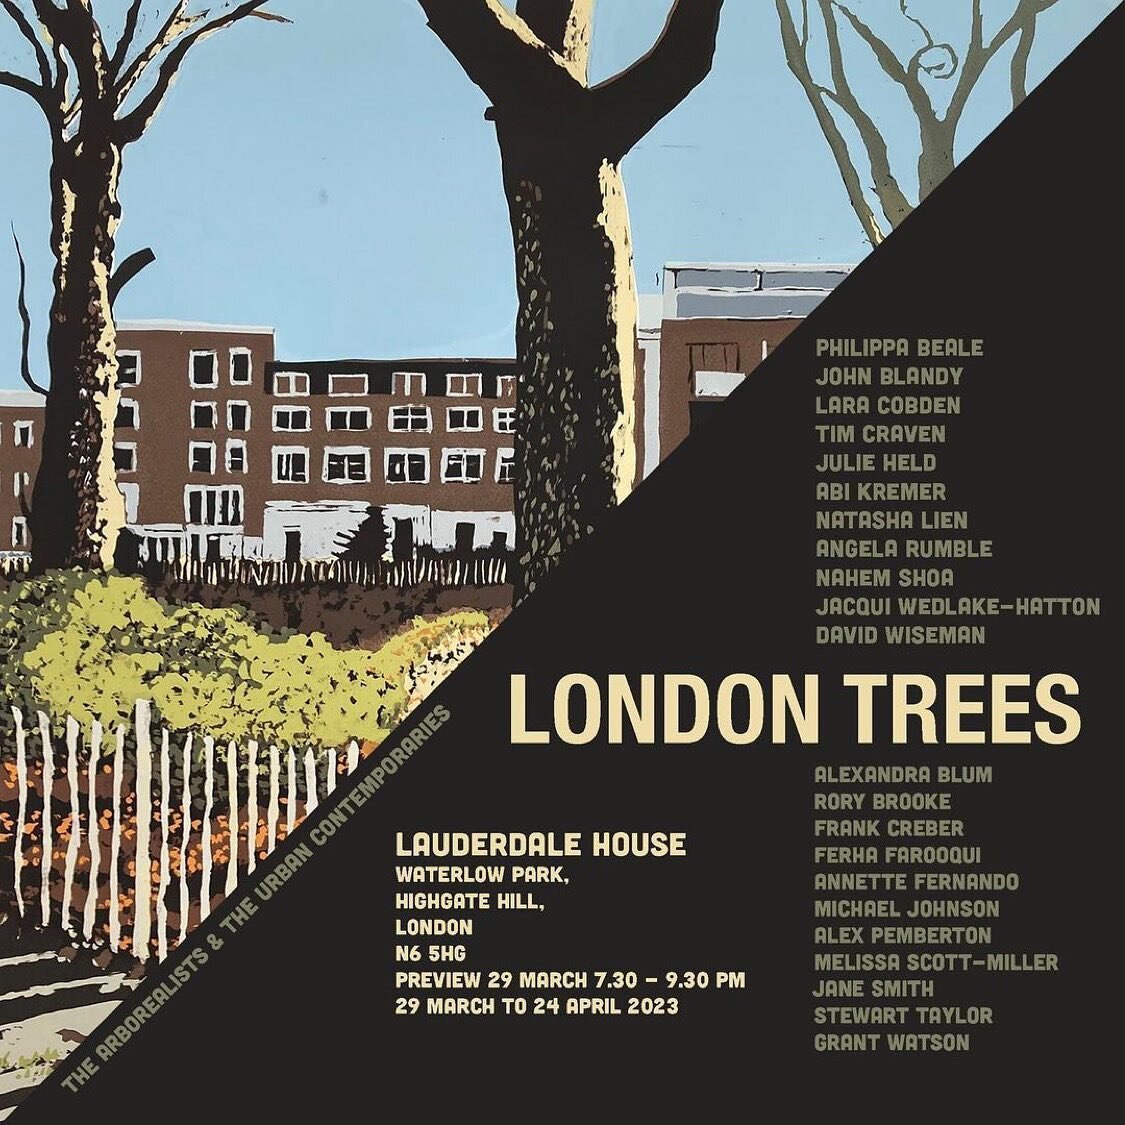 Repost from @rory_brooke_prints
&bull;
My screenprint &lsquo;Fence &amp; Trees&rsquo; will be in the @urbancontemporariesgroup exhibition &lsquo;London Trees&rsquo; at Lauderdale House, Waterlow Park, Highgate Hill, London, N6 5HG, 29th March to 24th